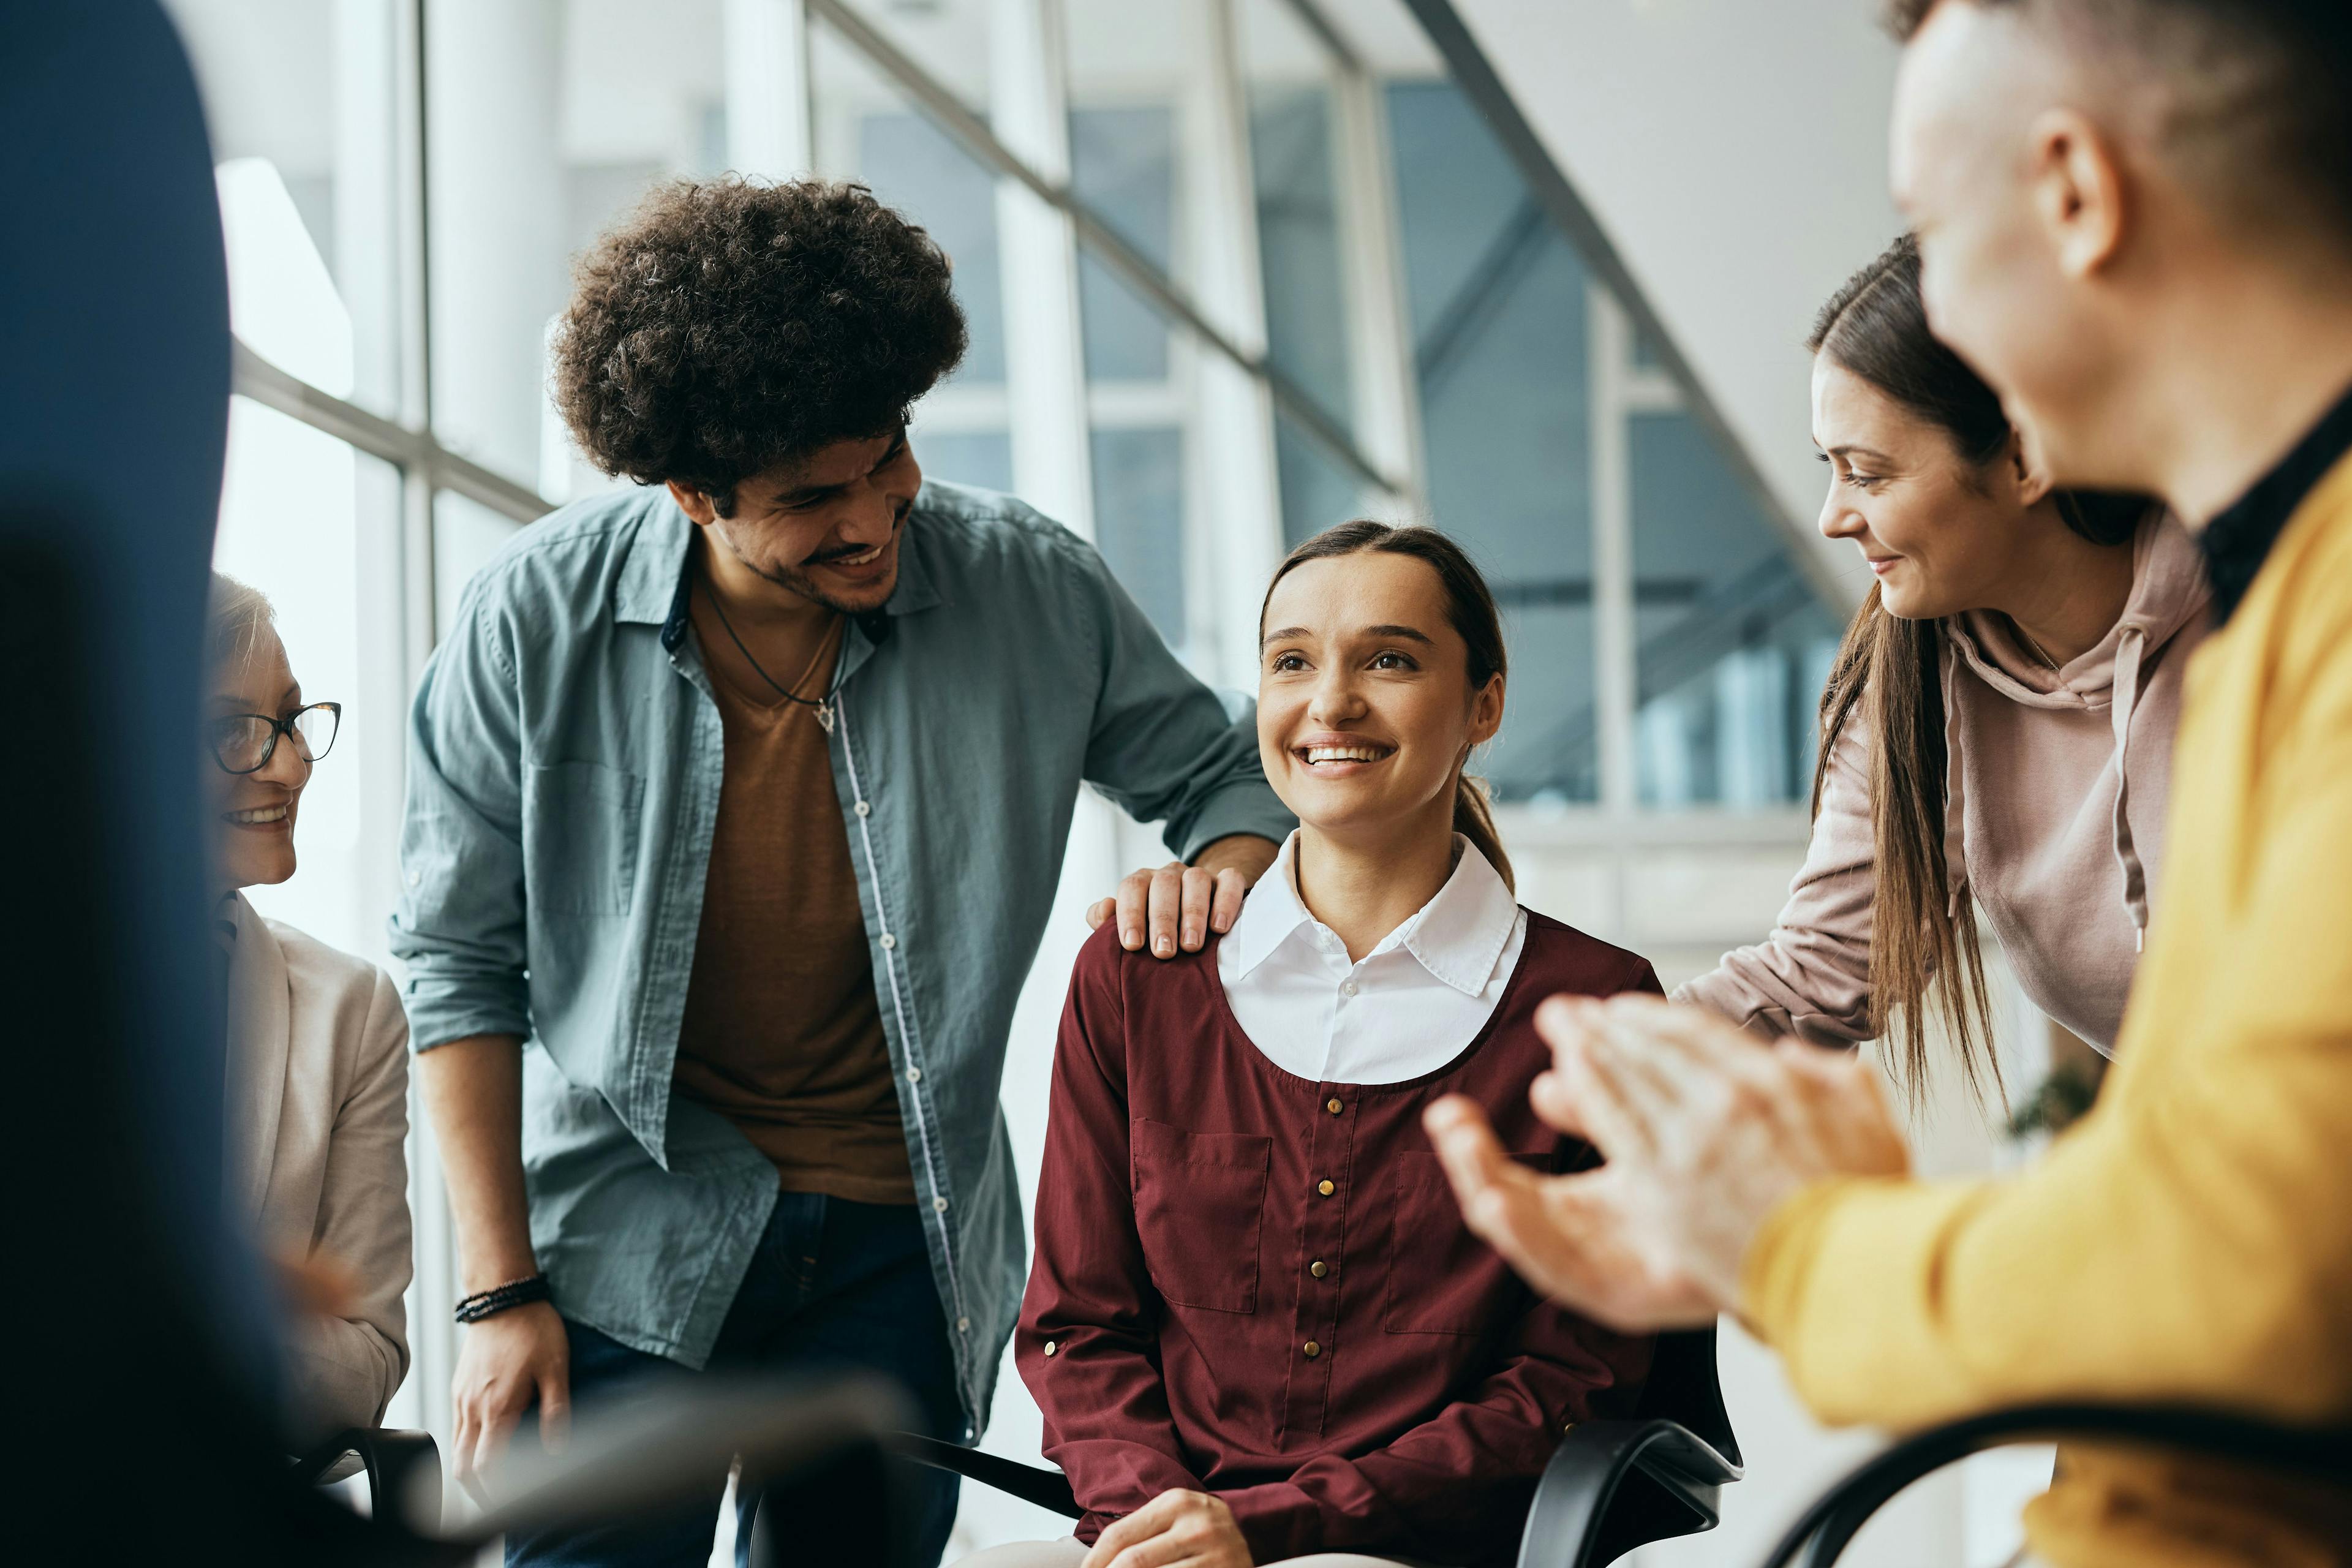 Young happy woman receives support from attenders of group therapy at mental health center | Image Credit: Drazen – stock.adobe.com